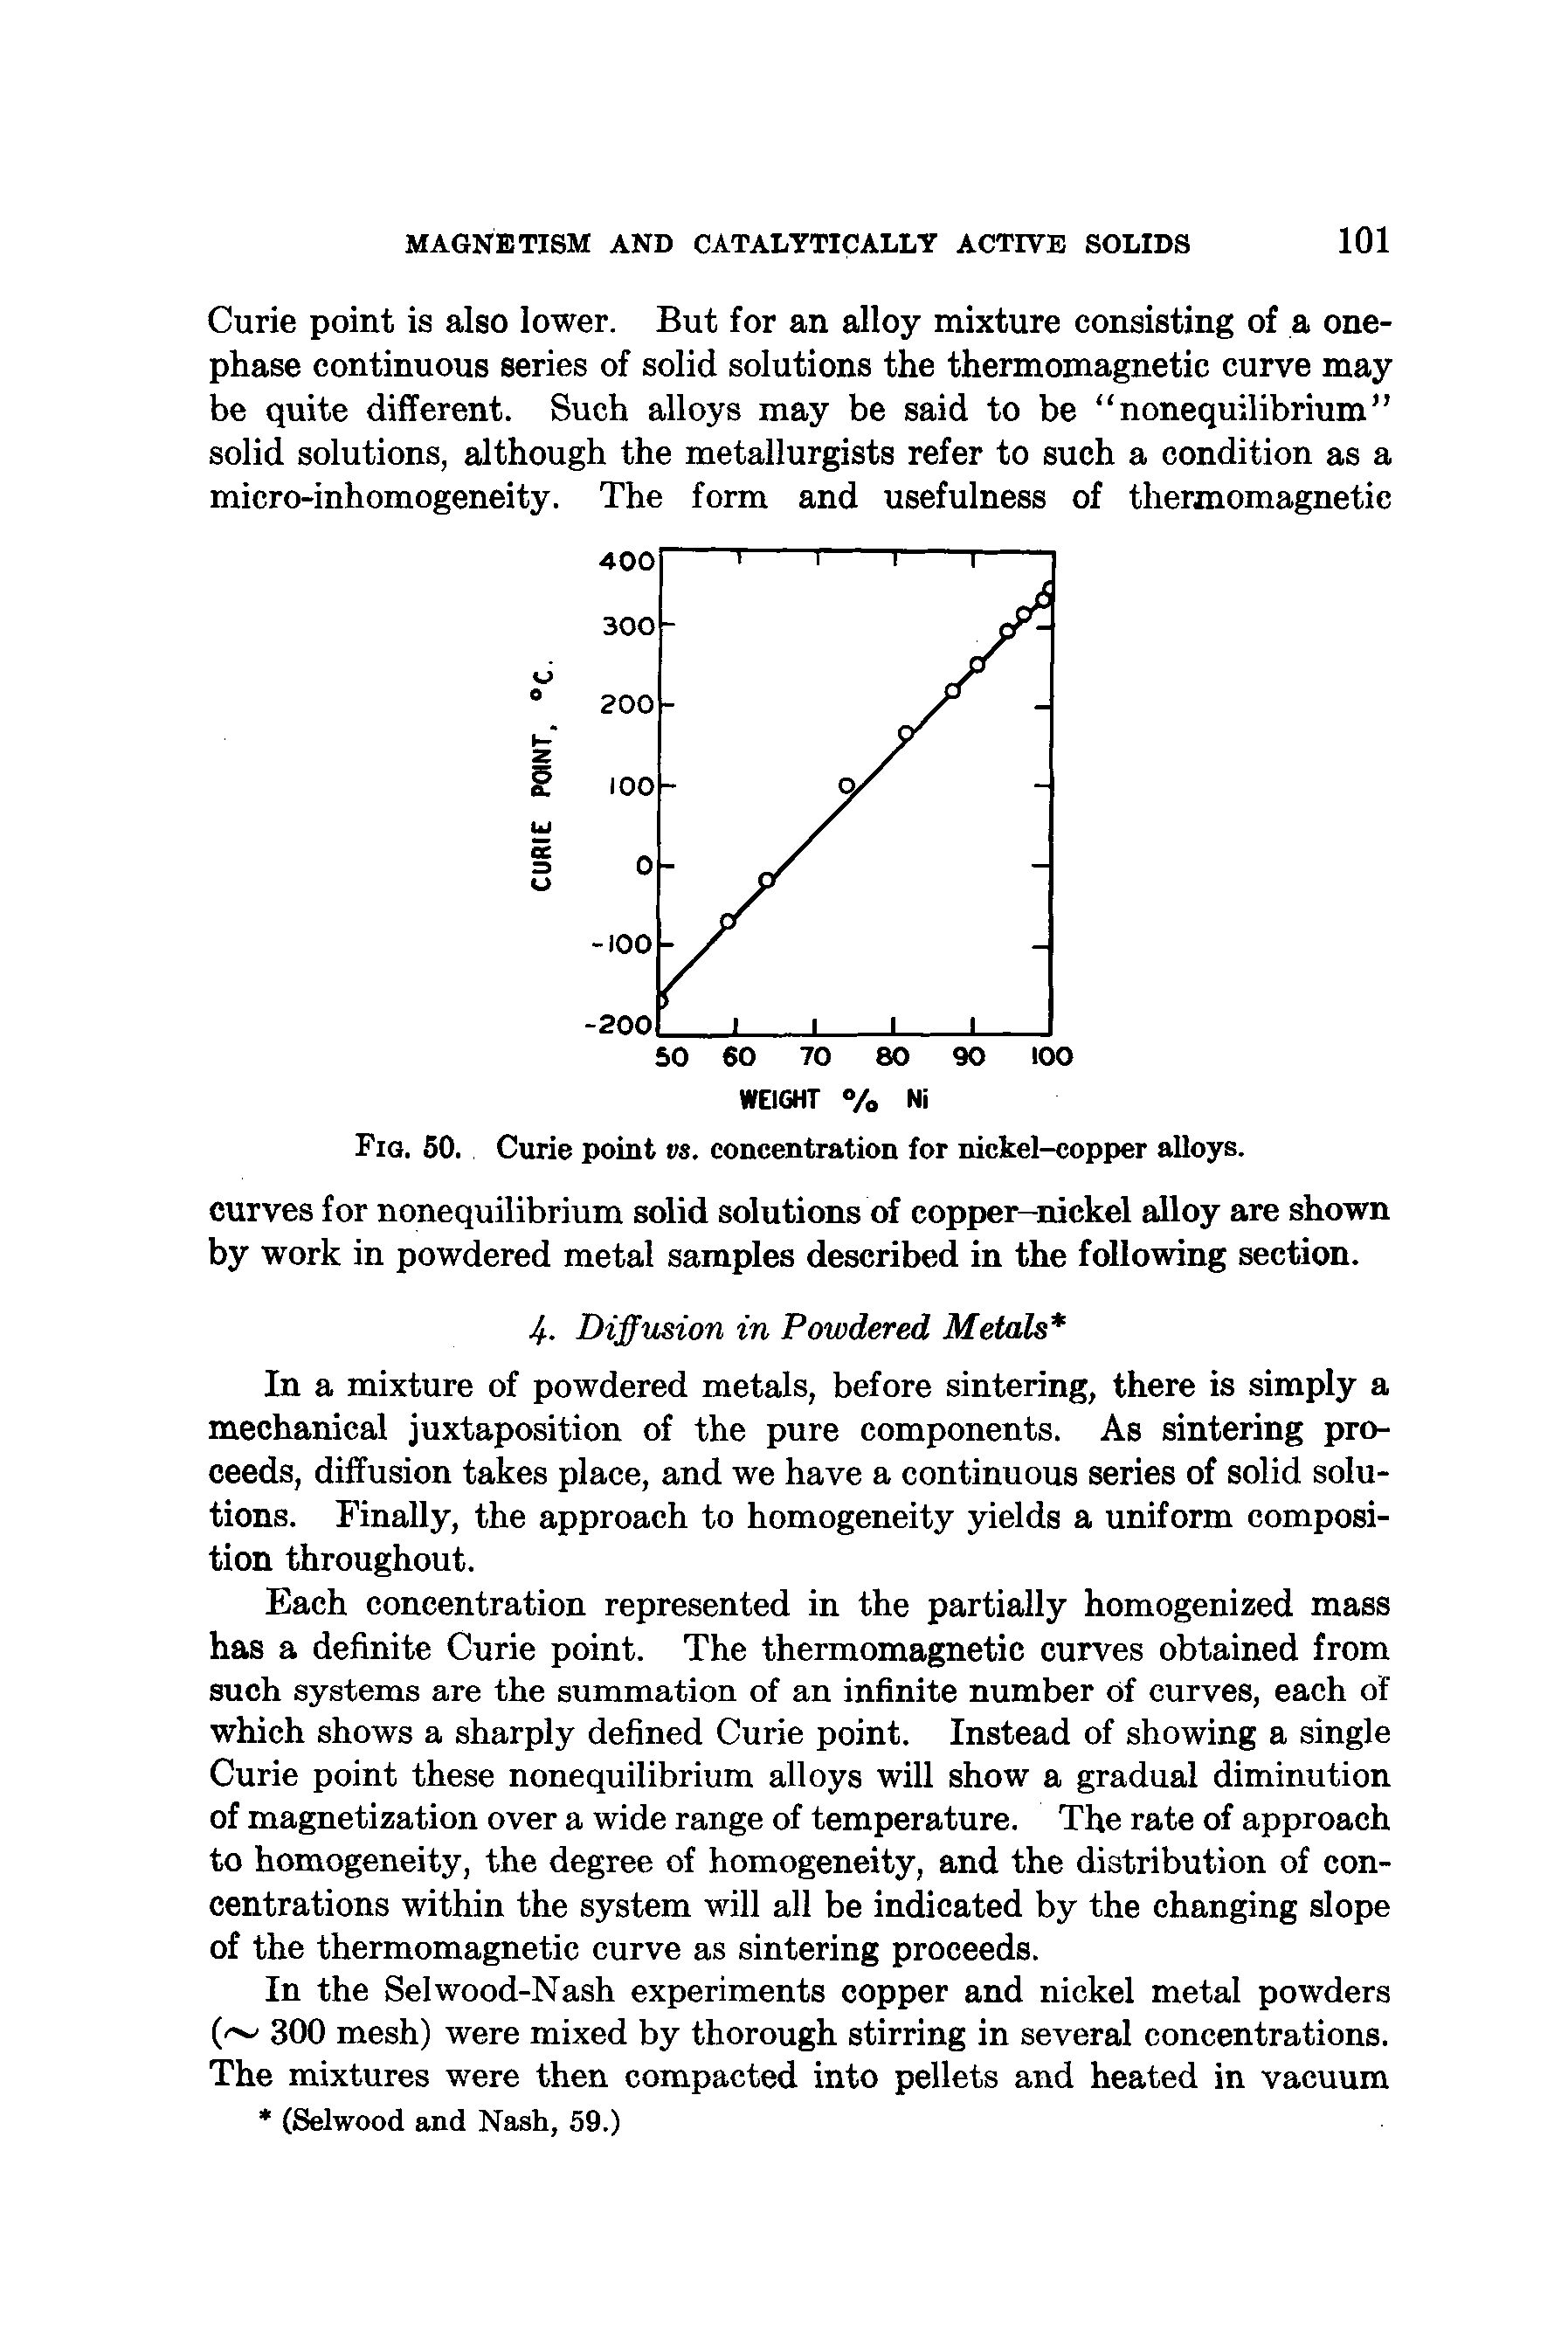 Fig. 50. Curie point vs. concentration for nickel-copper alloys.